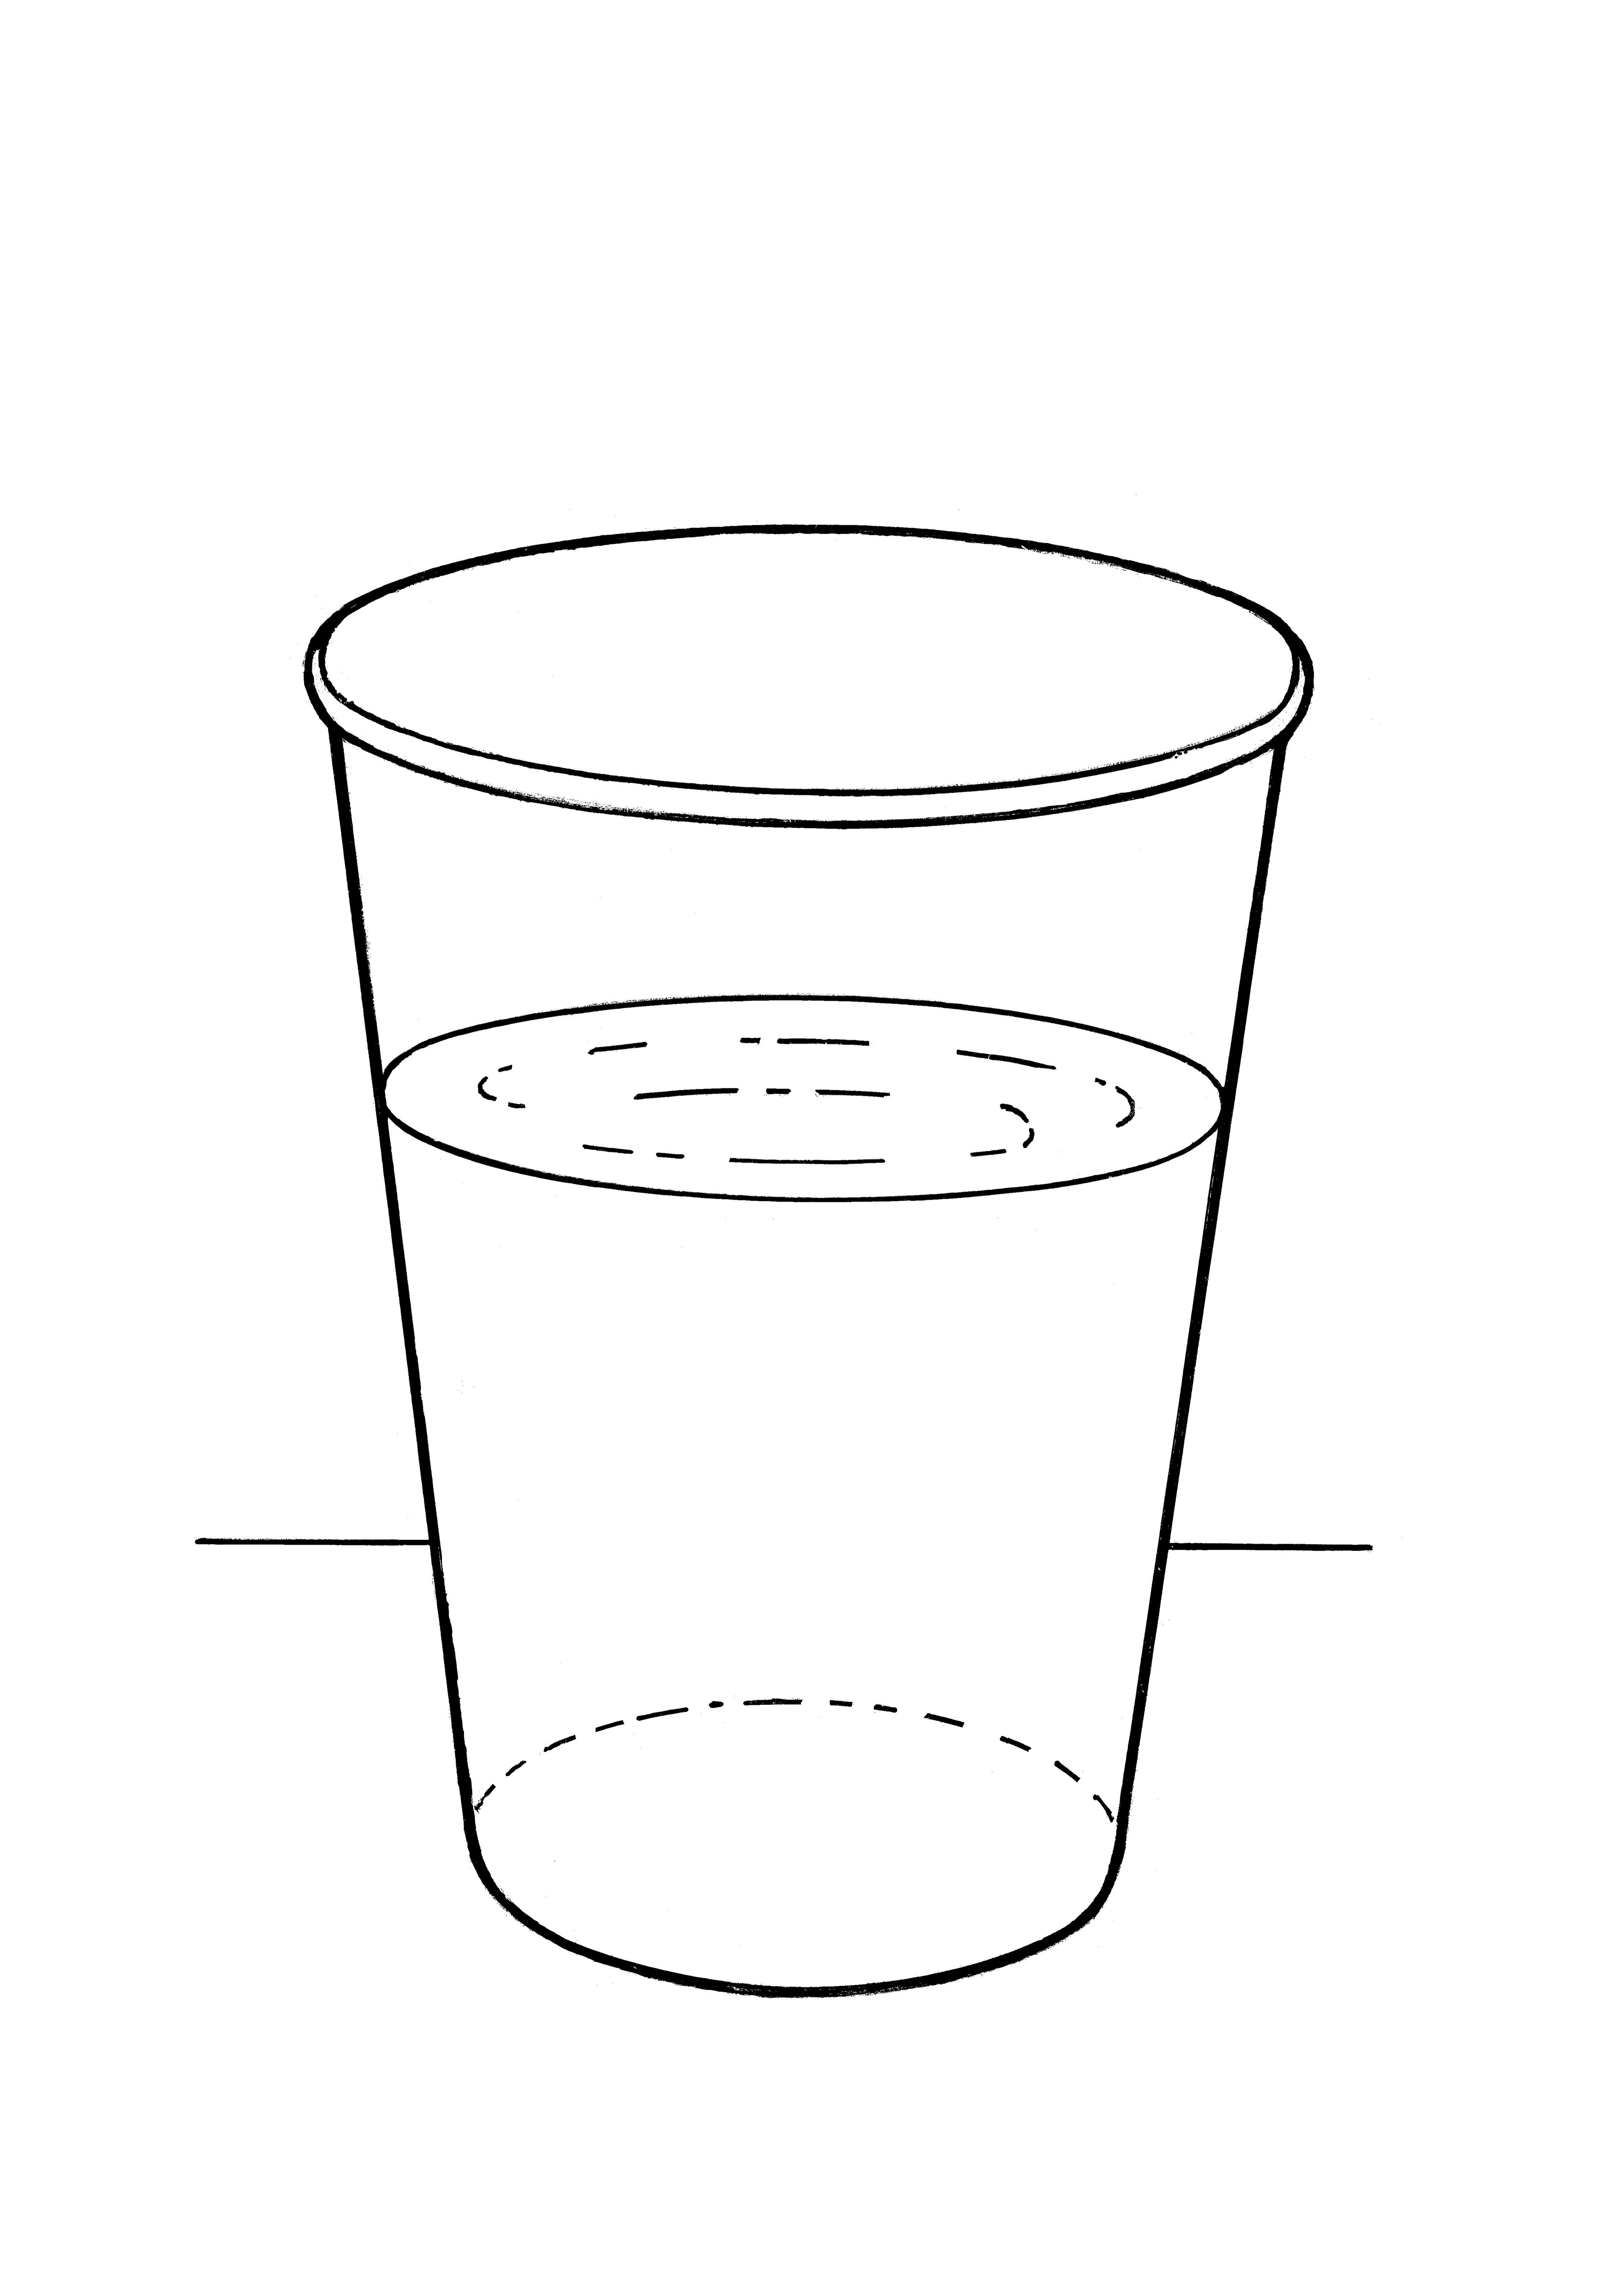 An illustration of a glass of water.